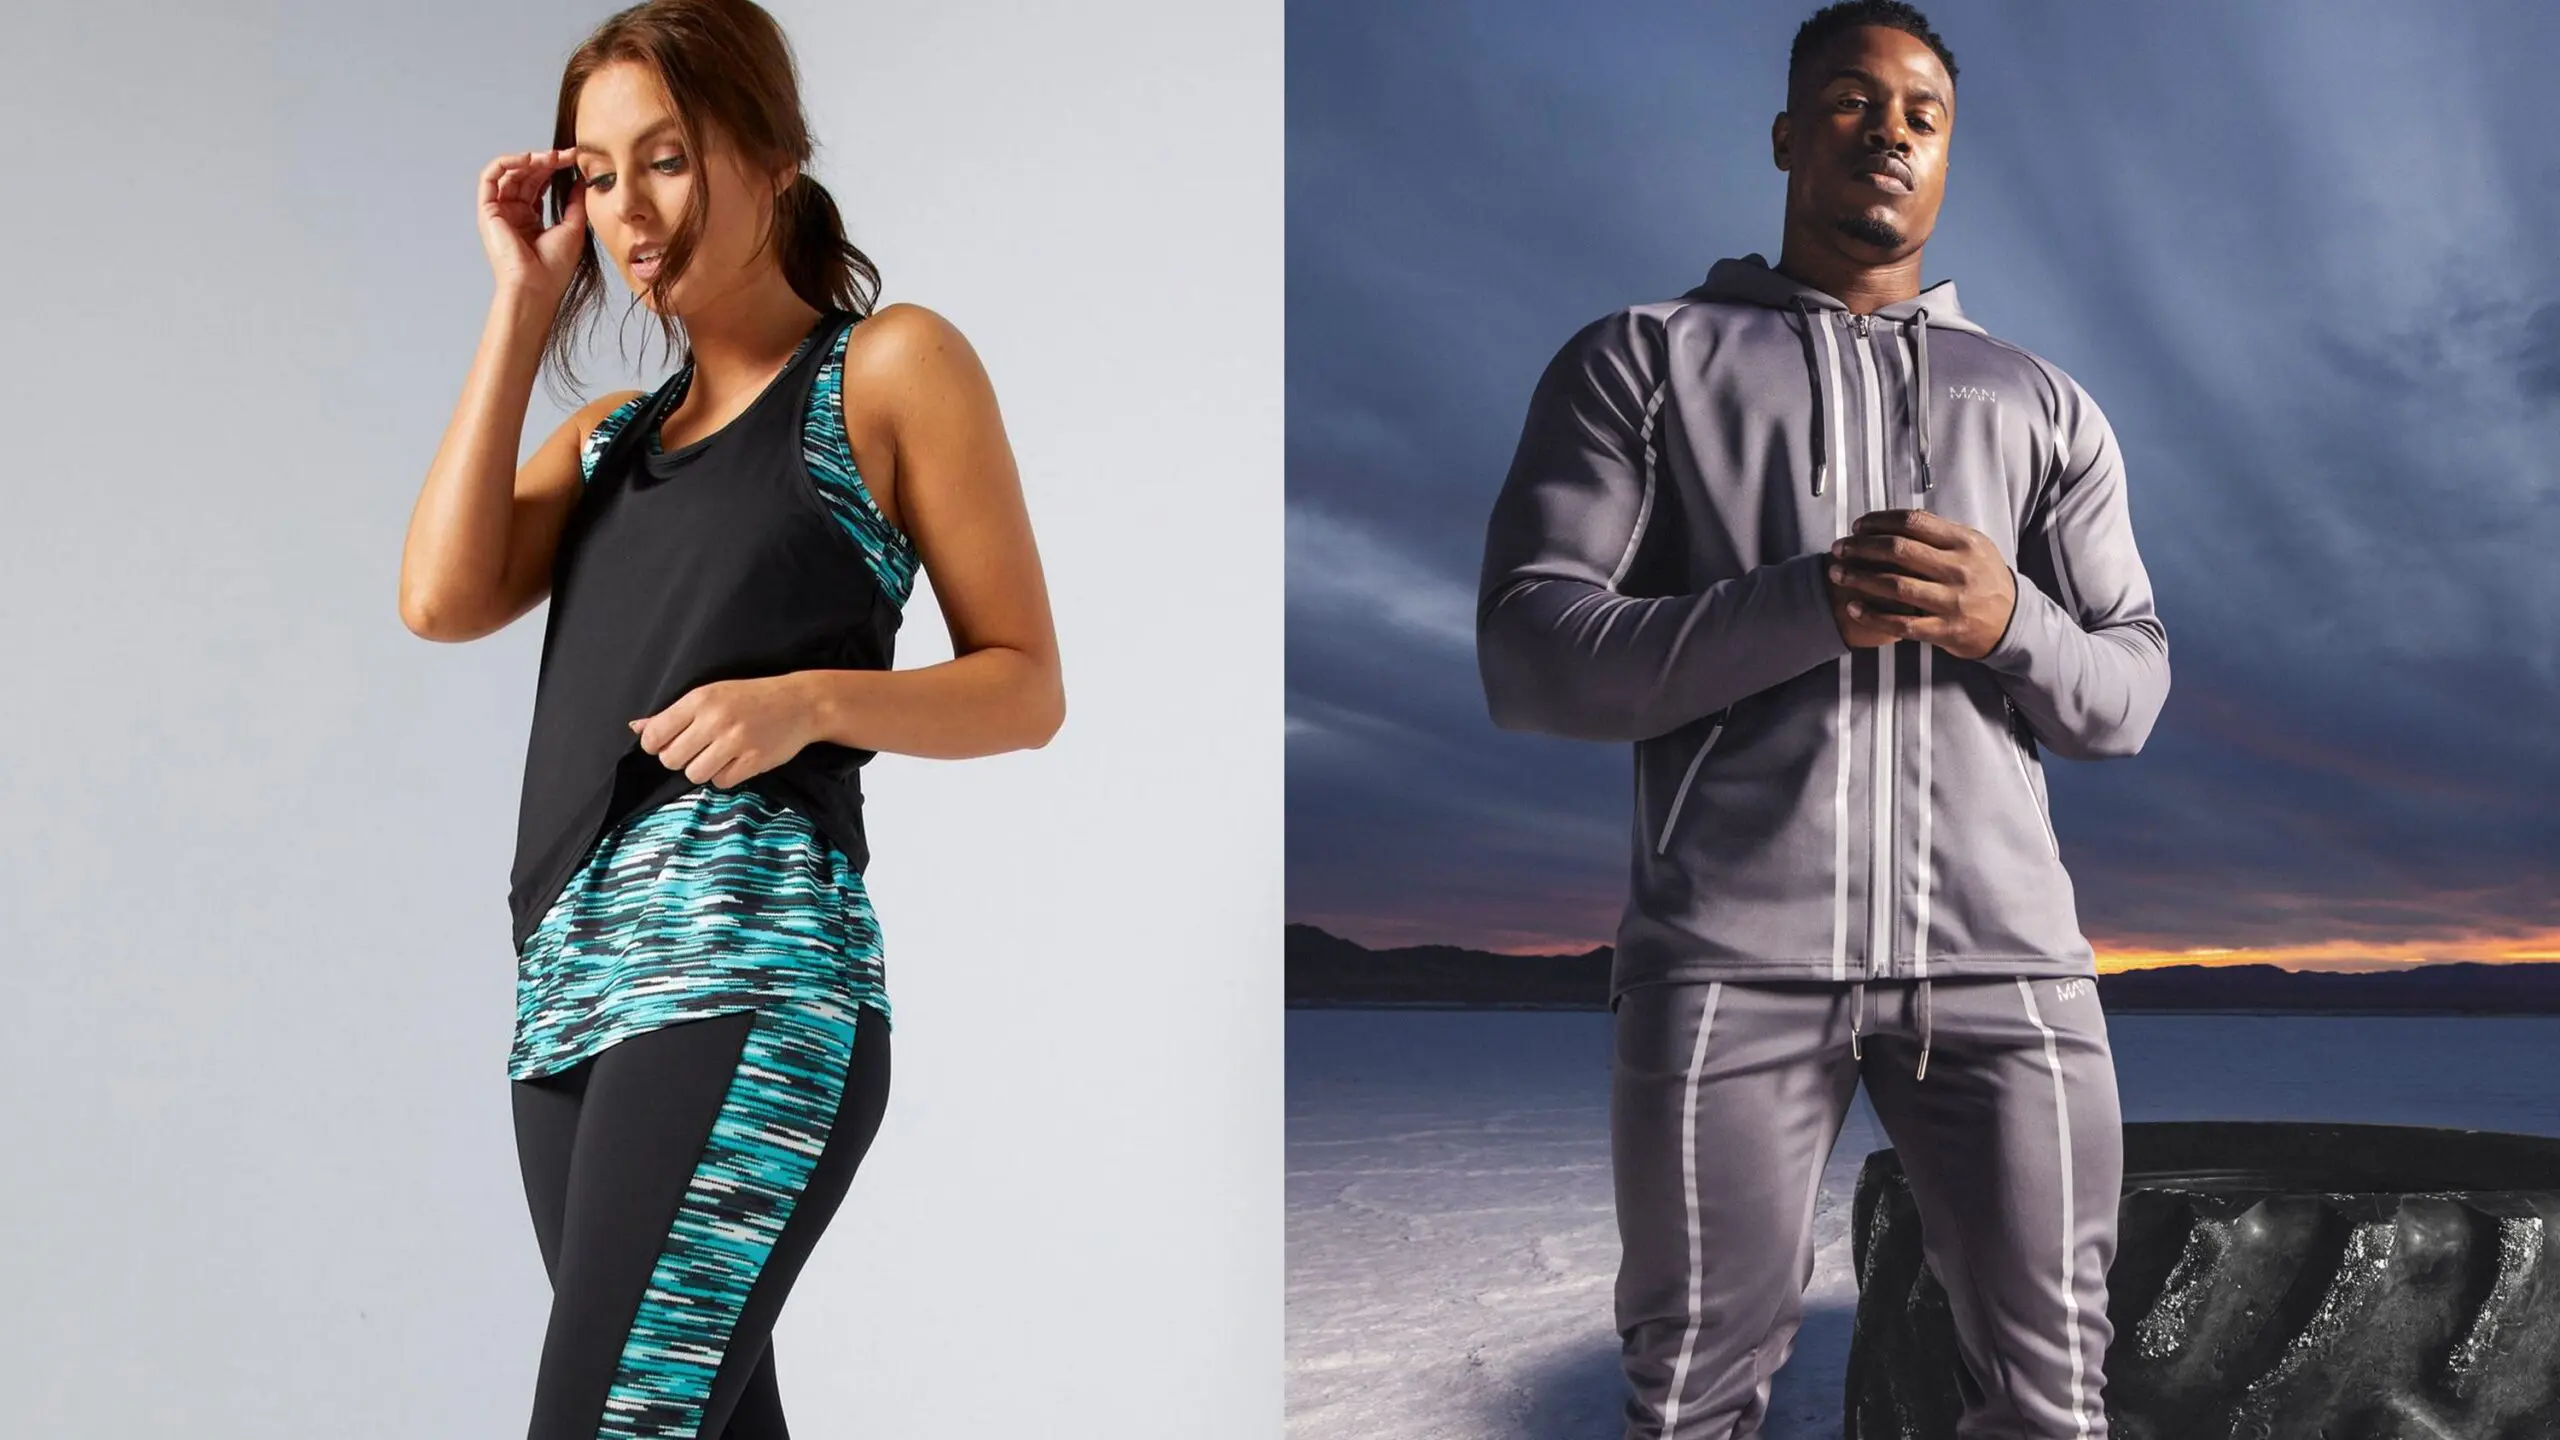 Man and woman in sportingwear scaled